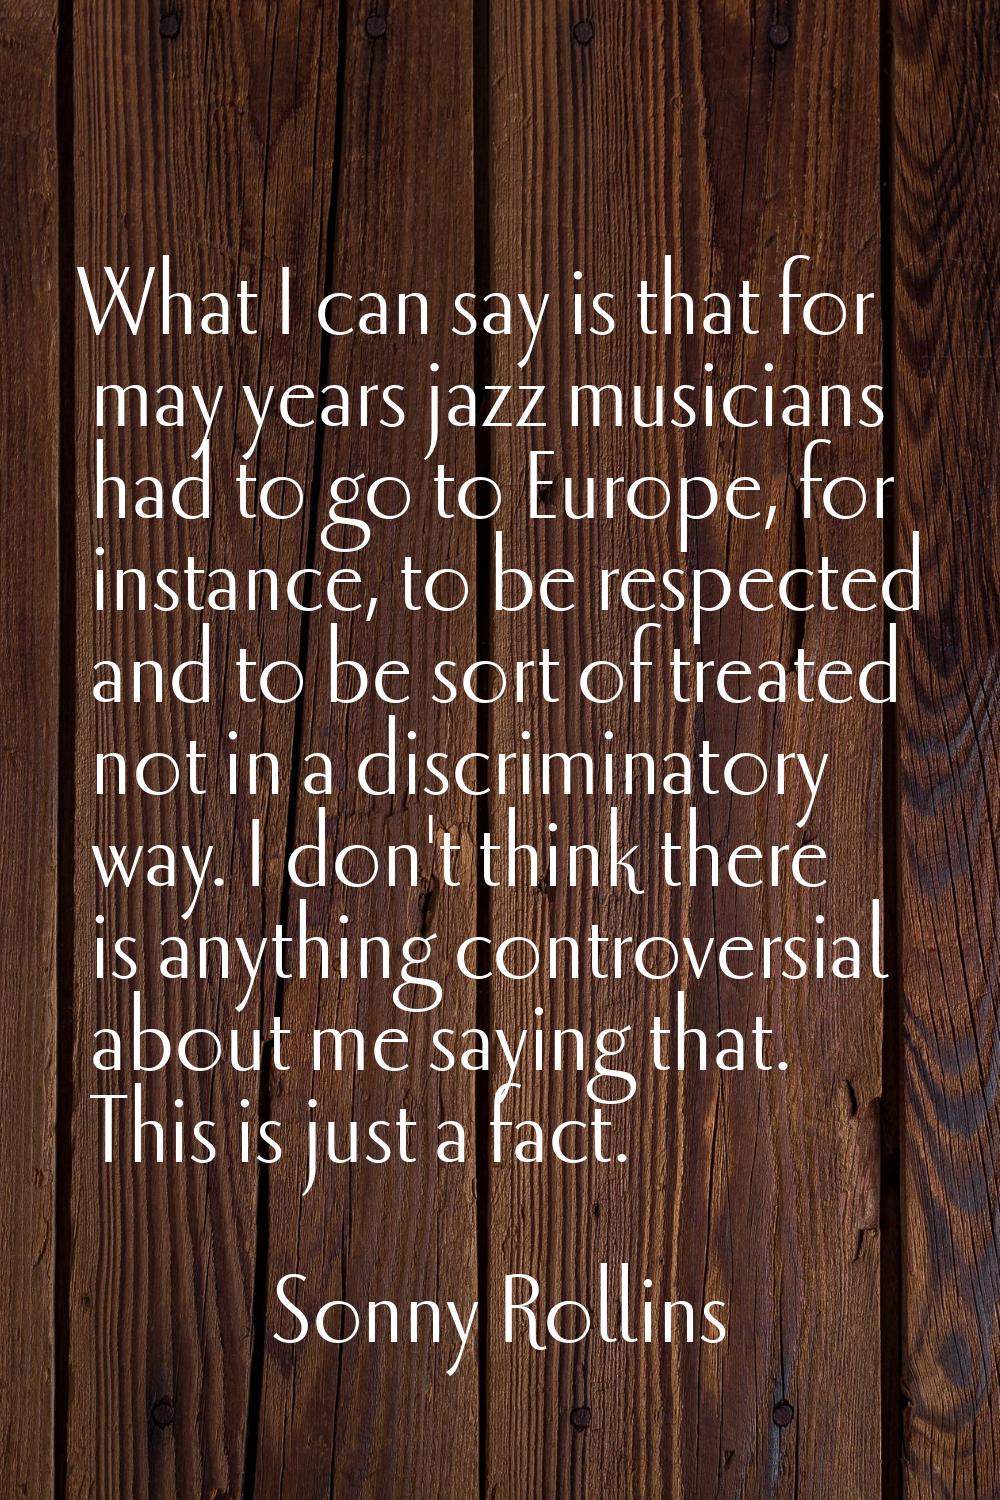 What I can say is that for may years jazz musicians had to go to Europe, for instance, to be respec